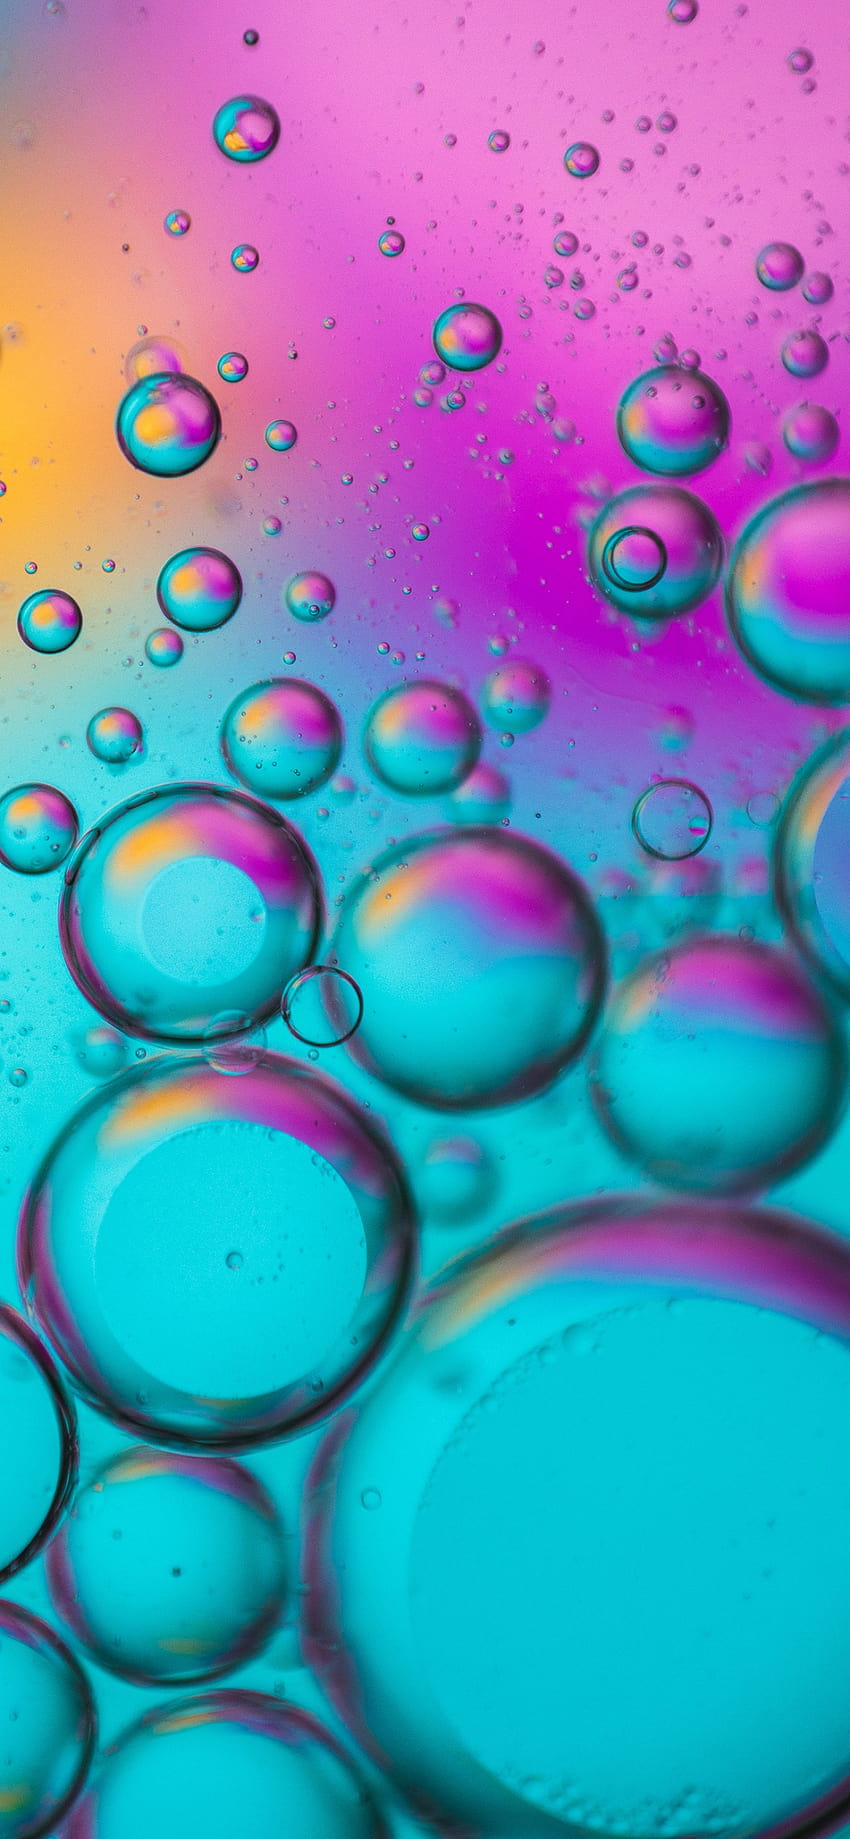 Bubbles , Spectrum, Colorful, Teal, Turquoise, Pink, Abstract, neon bubble HD phone wallpaper